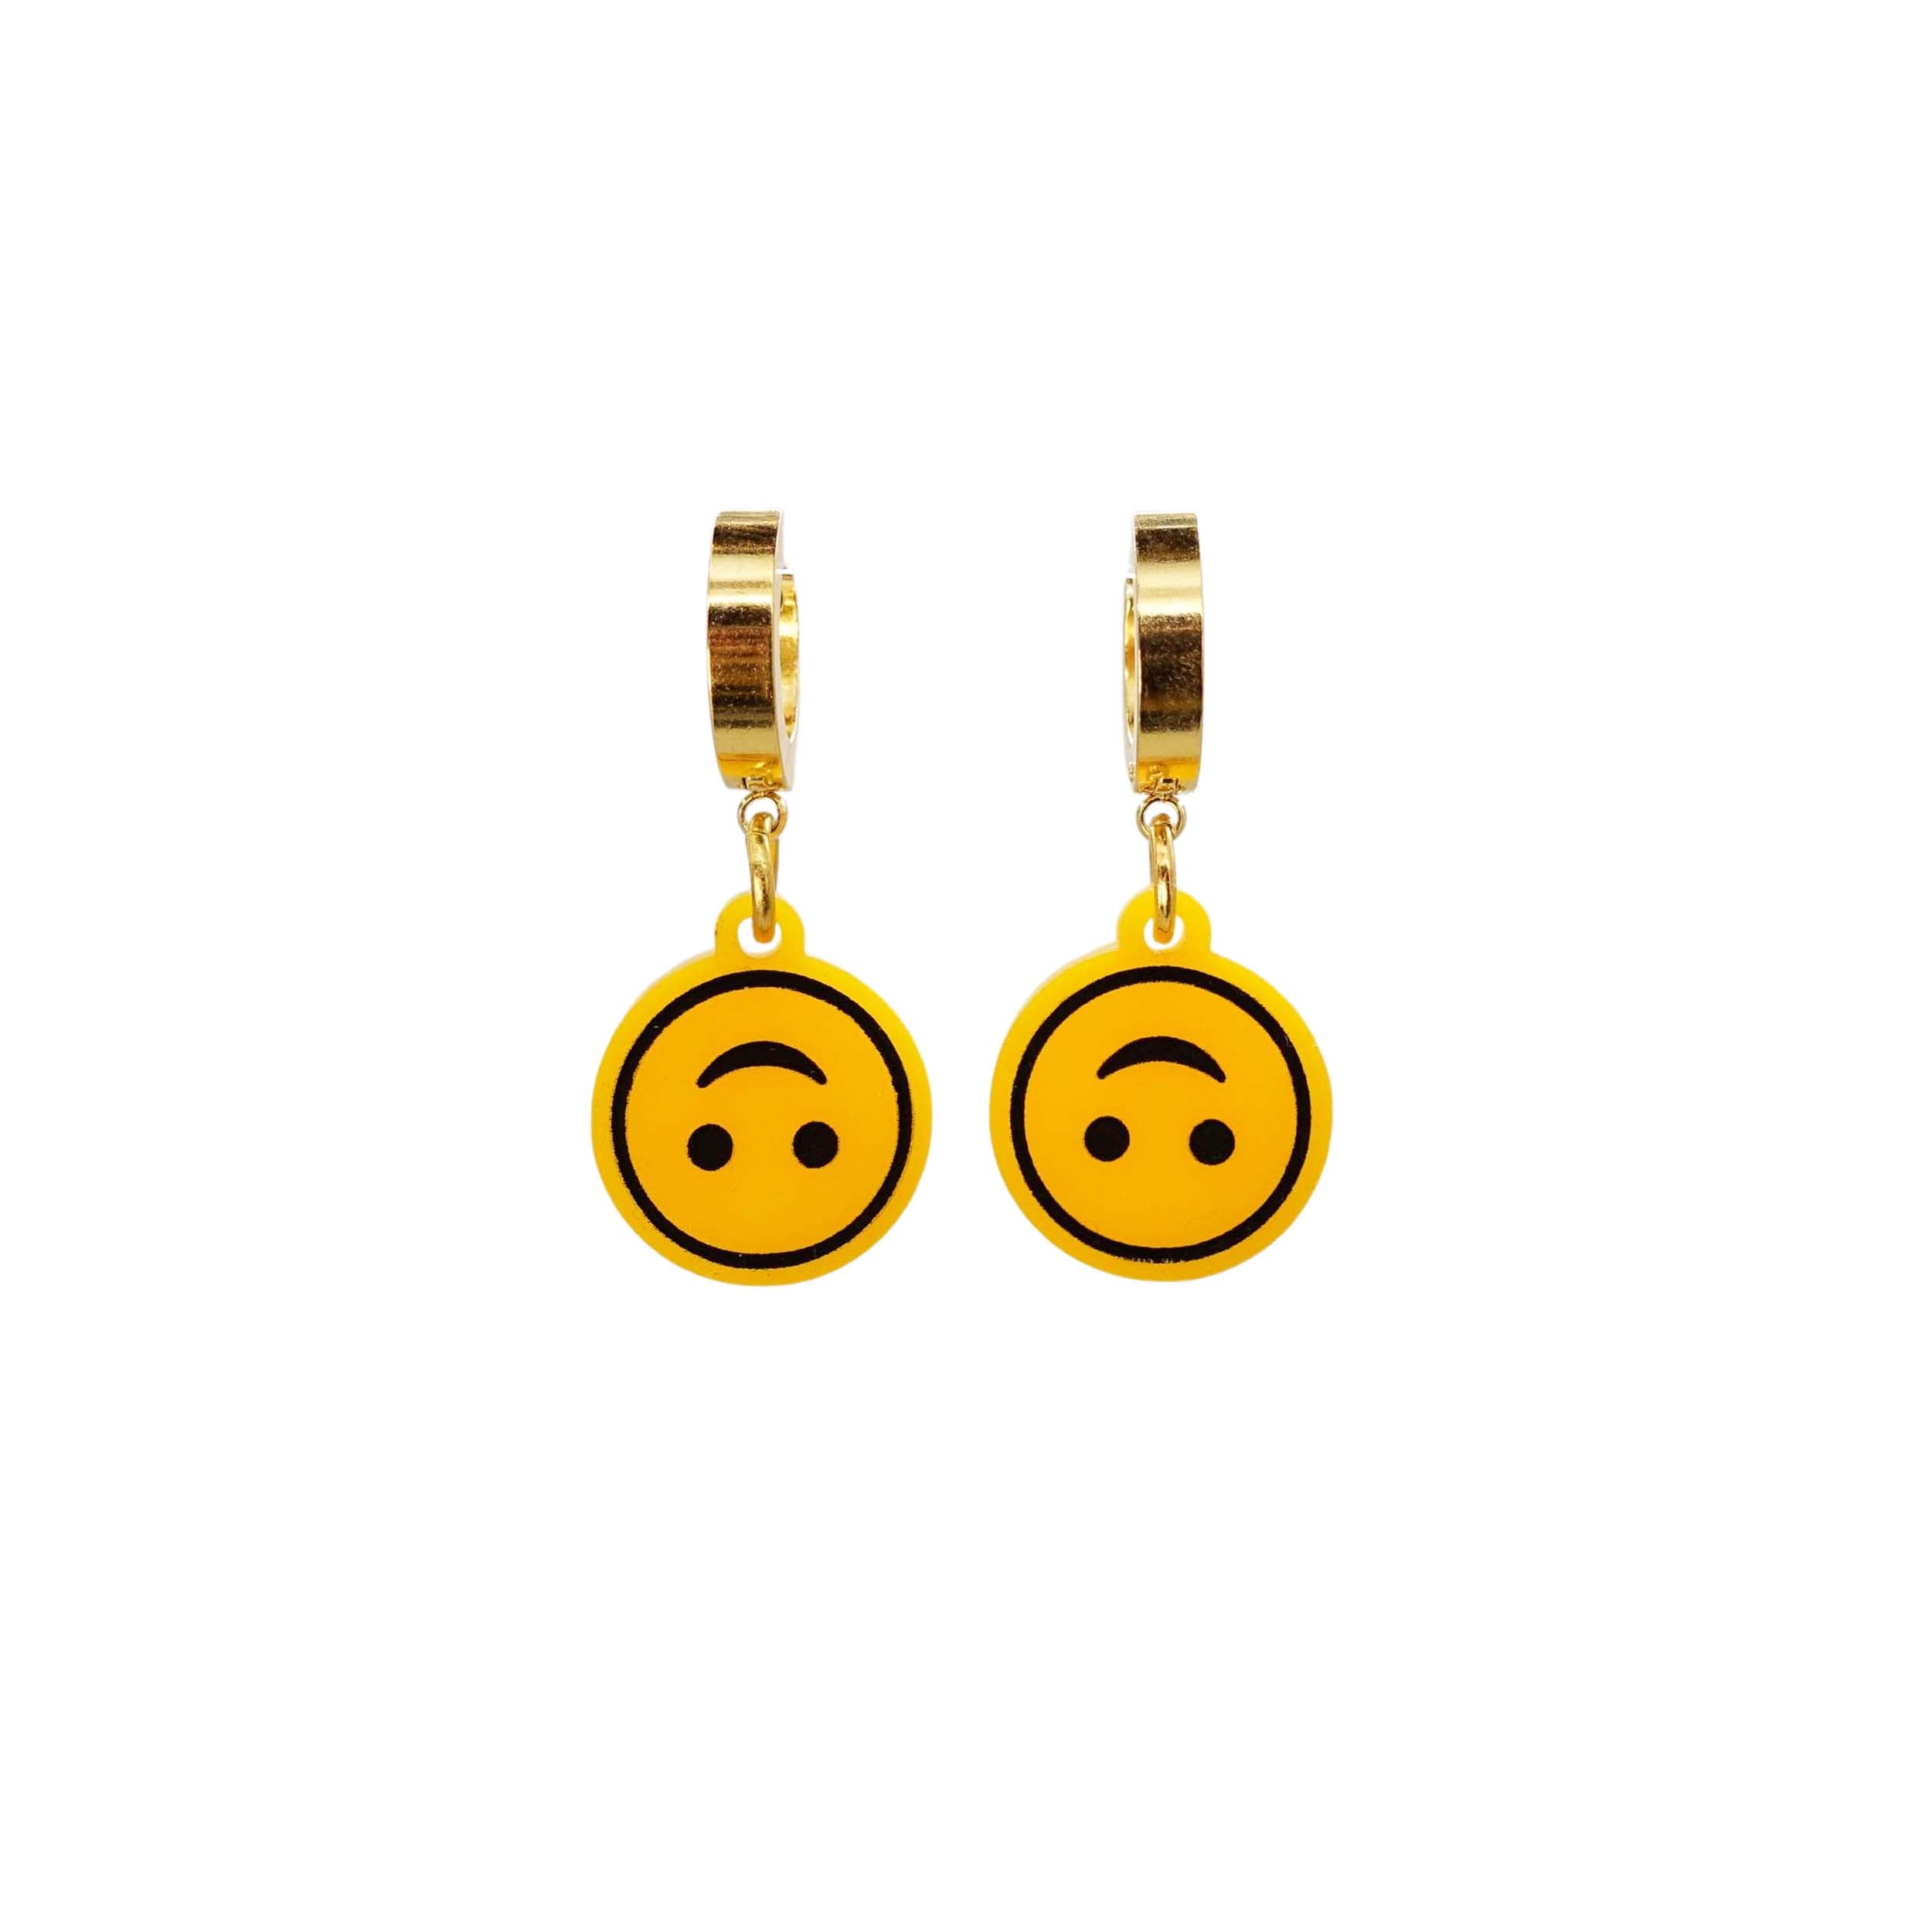 Upside-down smiley face earrings on gold huggie hoops, shown hanging against a white background. 